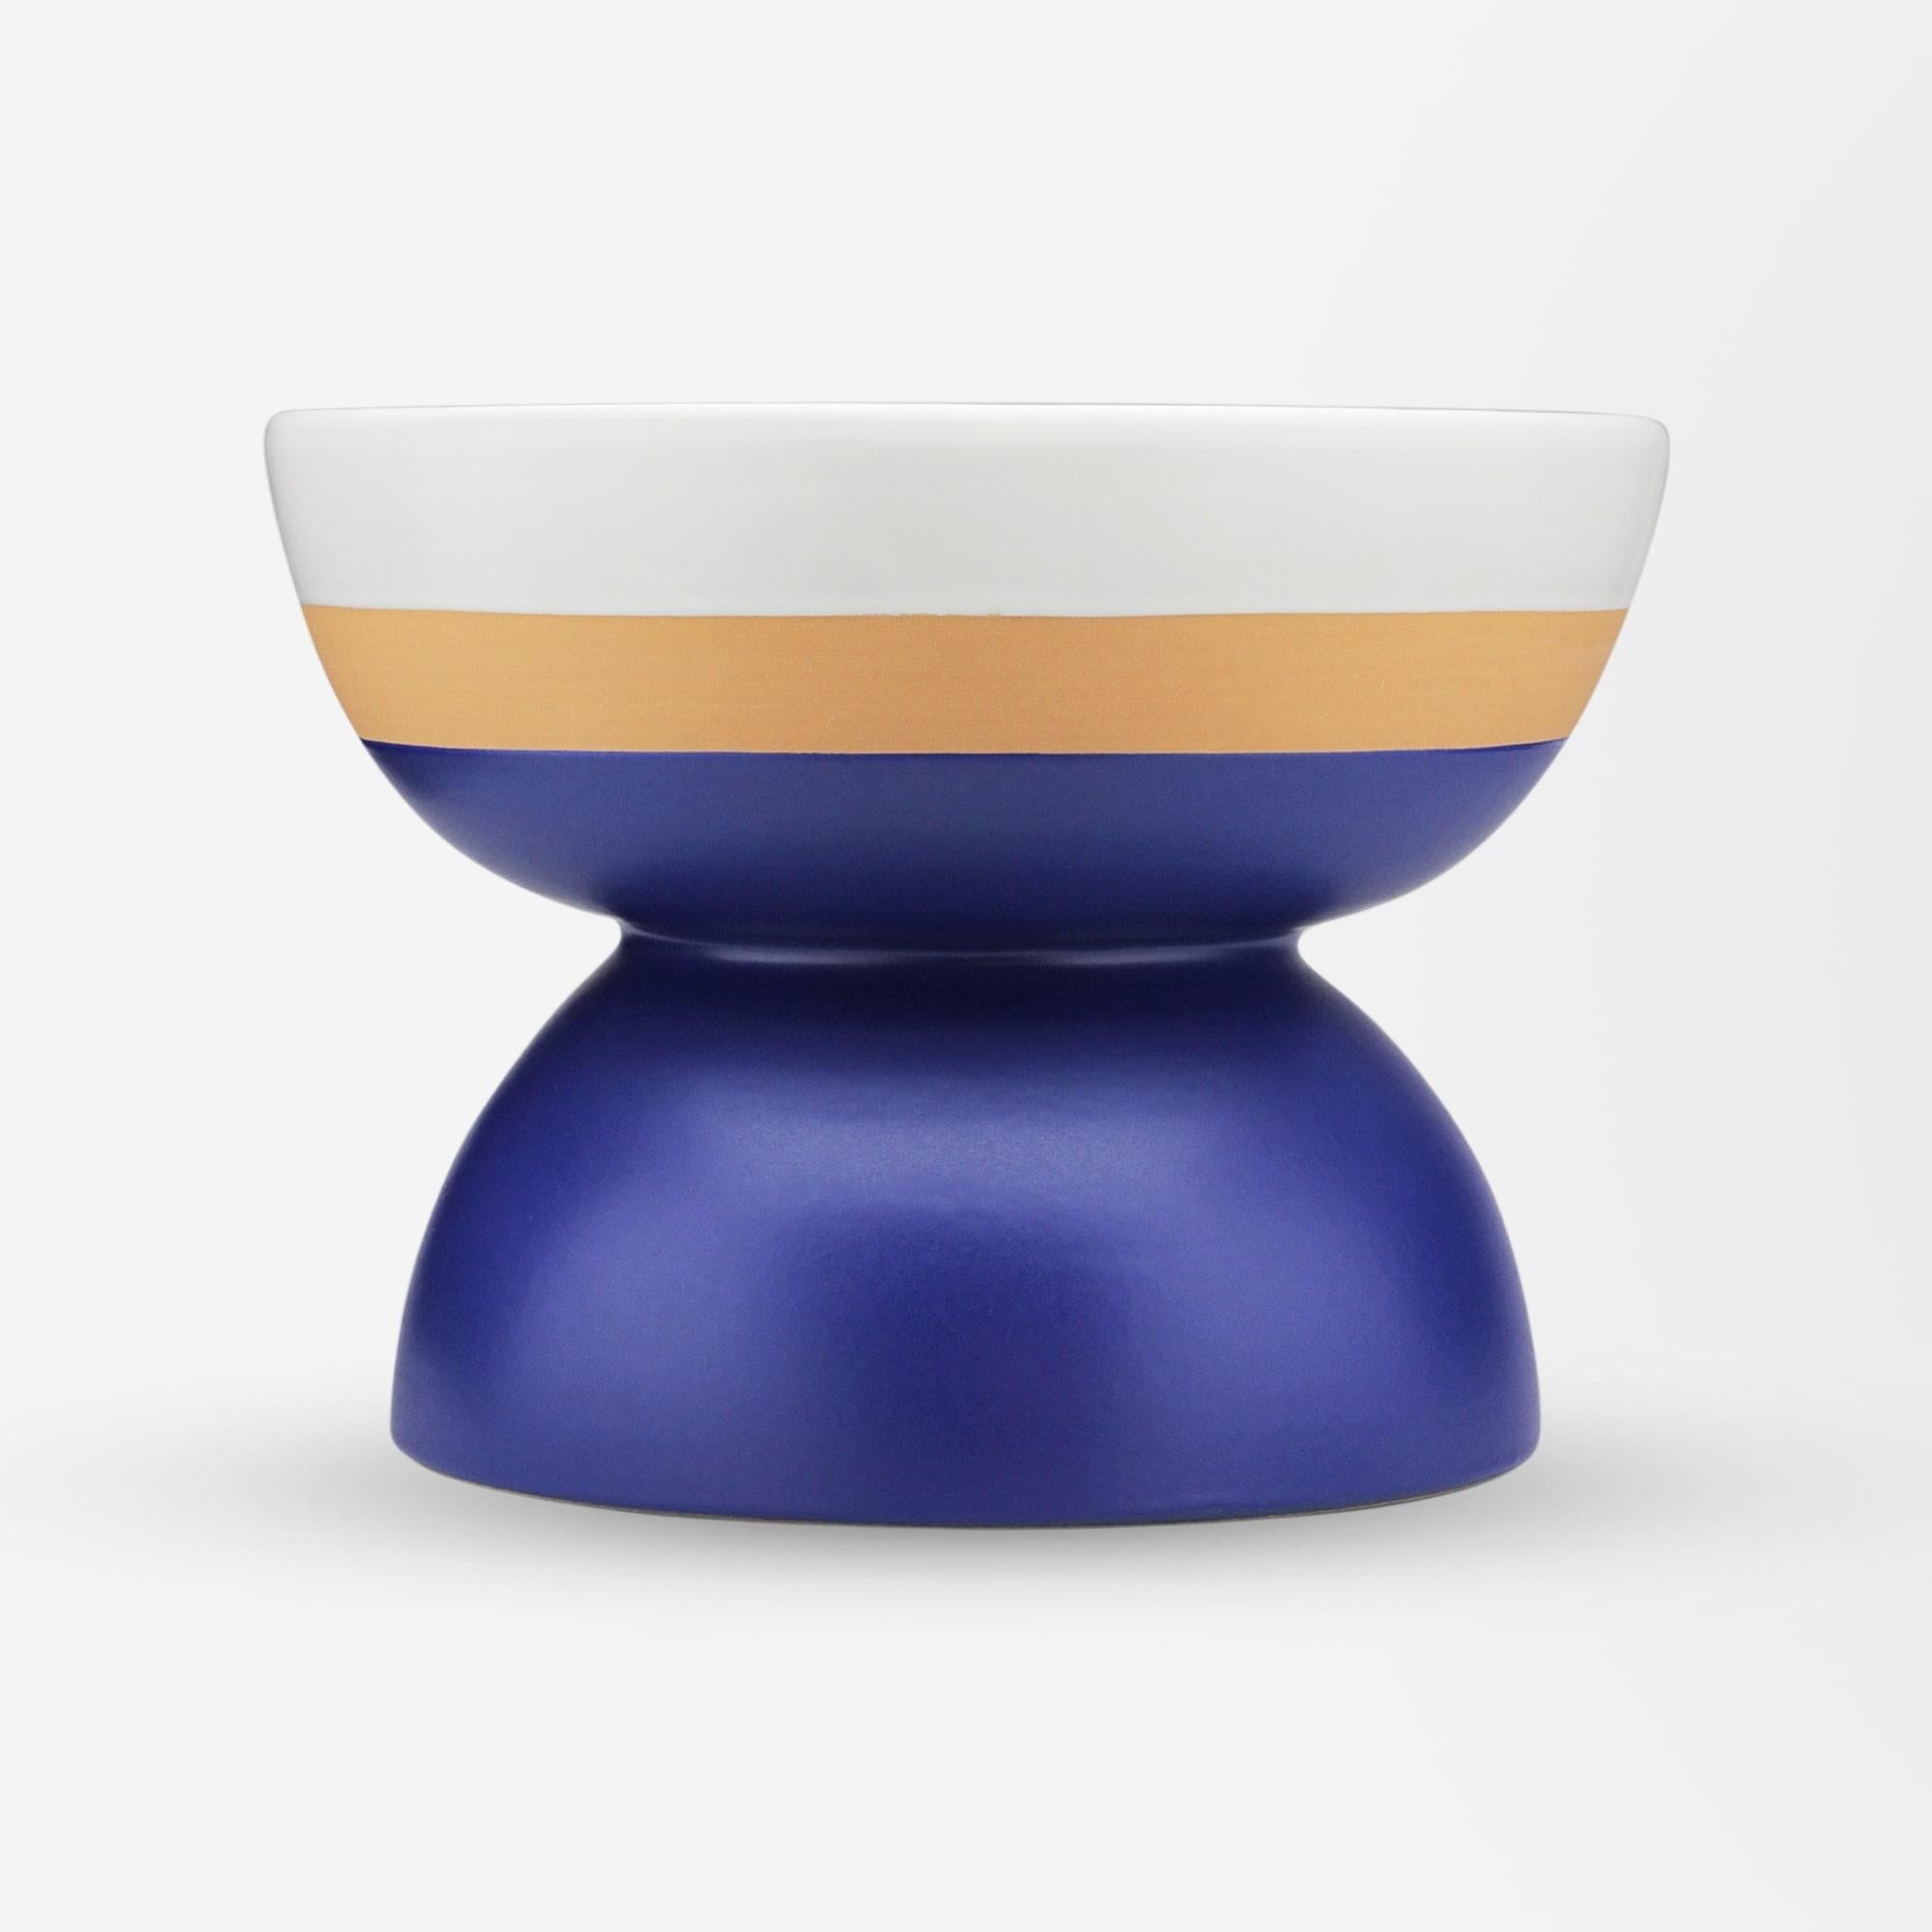 A modern made hand turned red clay bowl by Bitossi of Italy in a design by Ettore Sottsass (1917-2007). The hand crafted piece has been finished in a two tone matte white and indigo blue glaze and has been signed to the underside 'E.Sottsass